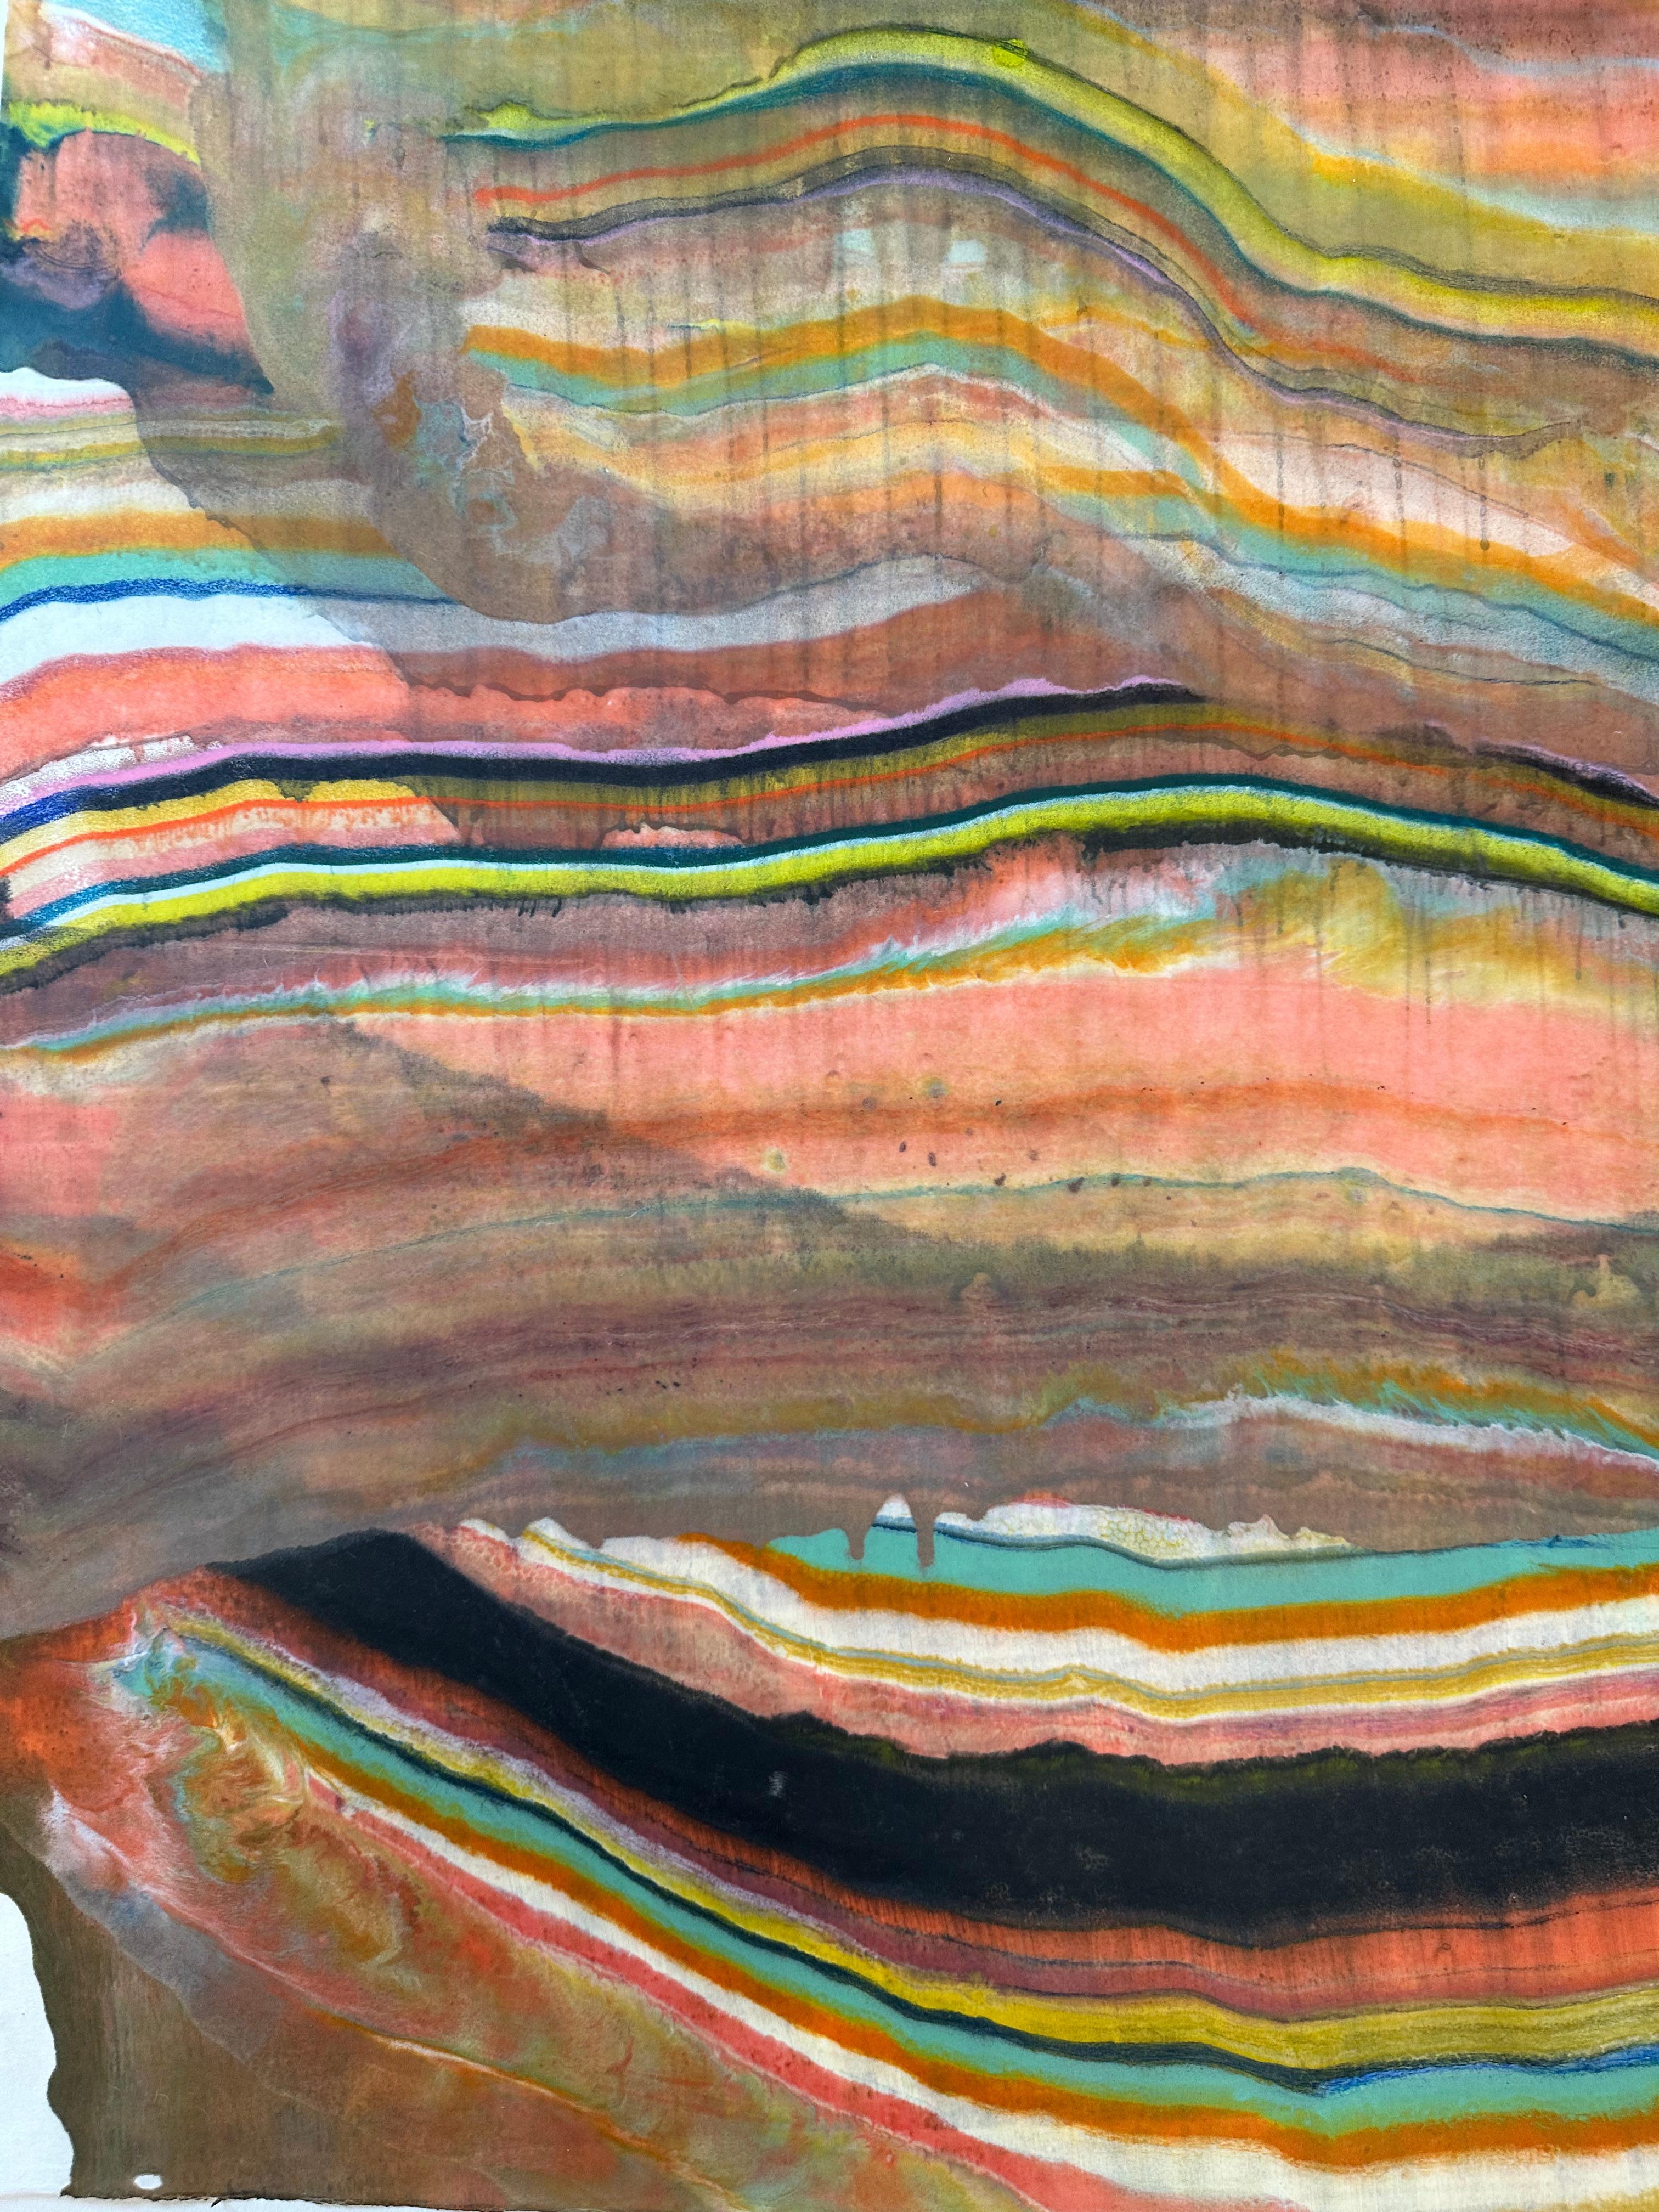 Laura Moriarty's Talking to Rocks 10 is a multicolored encaustic monotype on kozo paper. Layers of pigmented beeswax on lightweight paper create an undulating composition suggesting layers of the earth's crust and geological formations depicted in